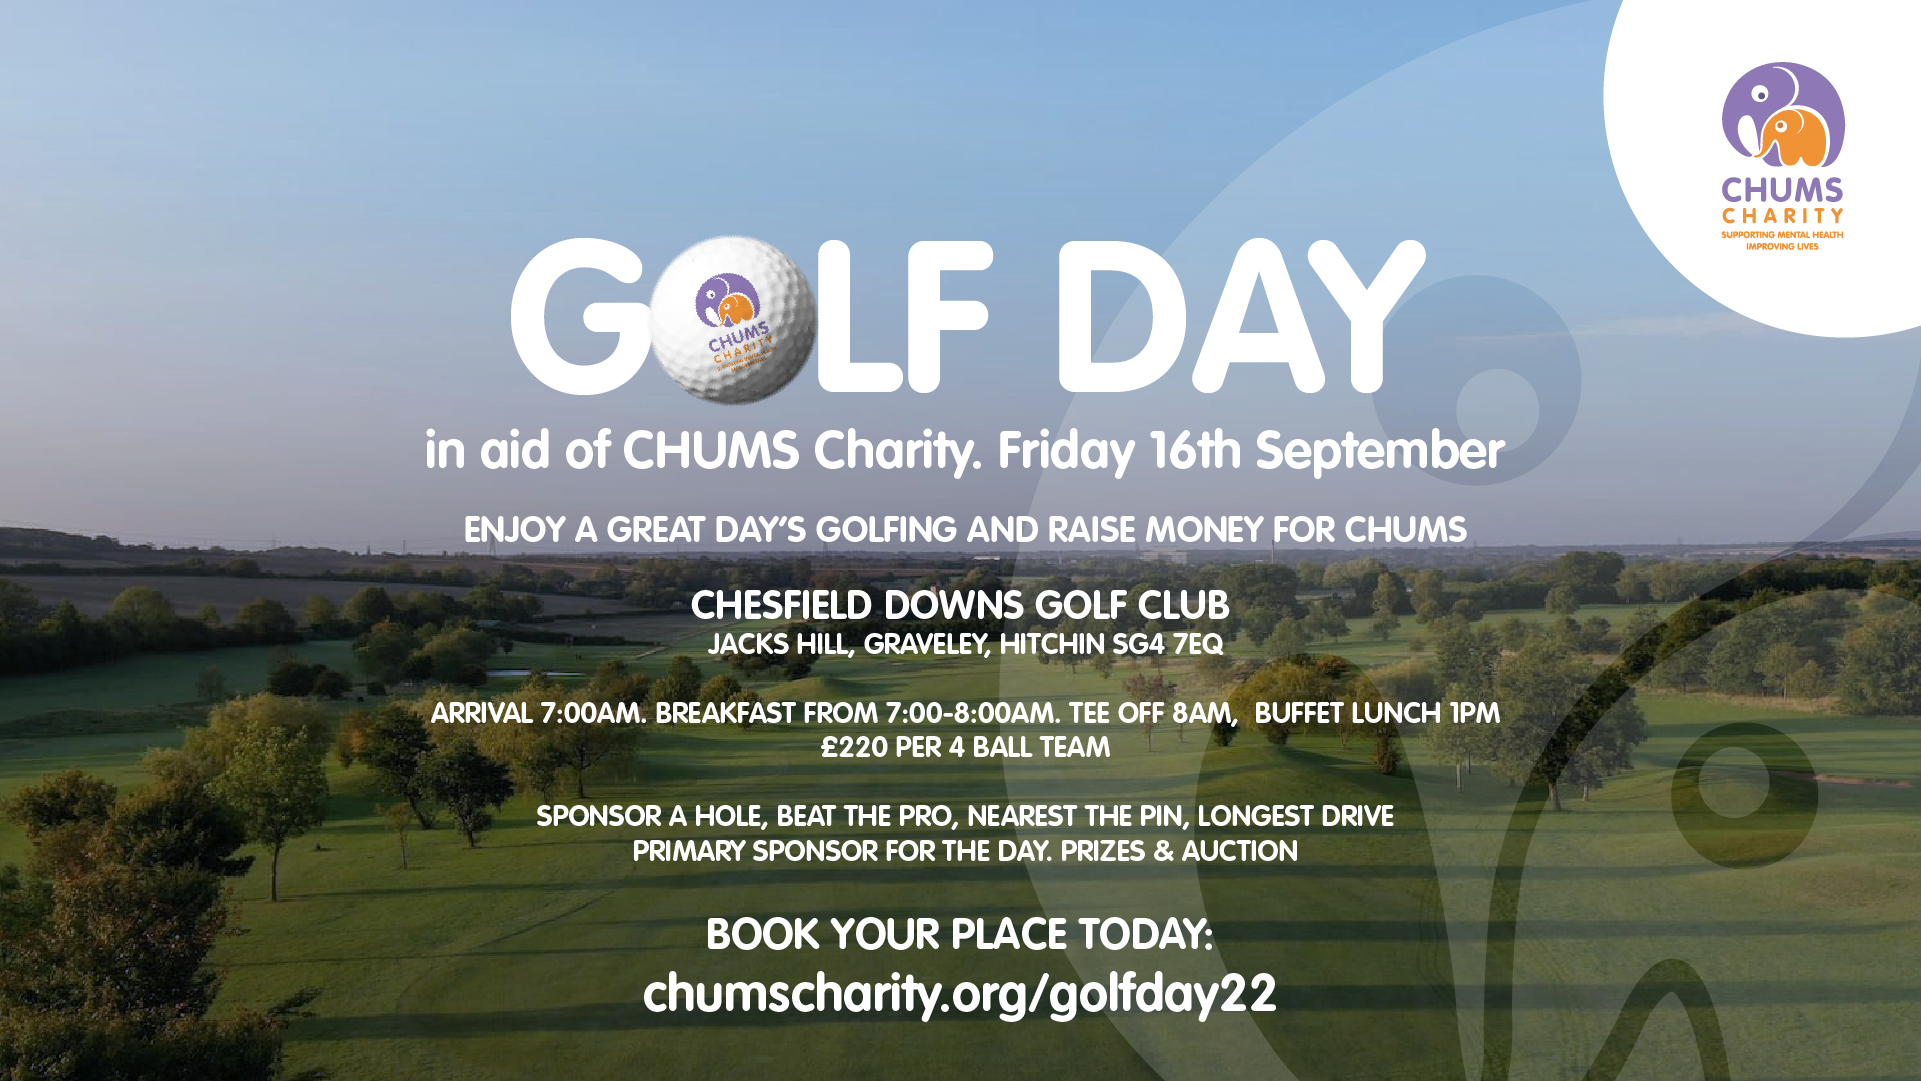 CHUMS Golf Day - Friday 16th December